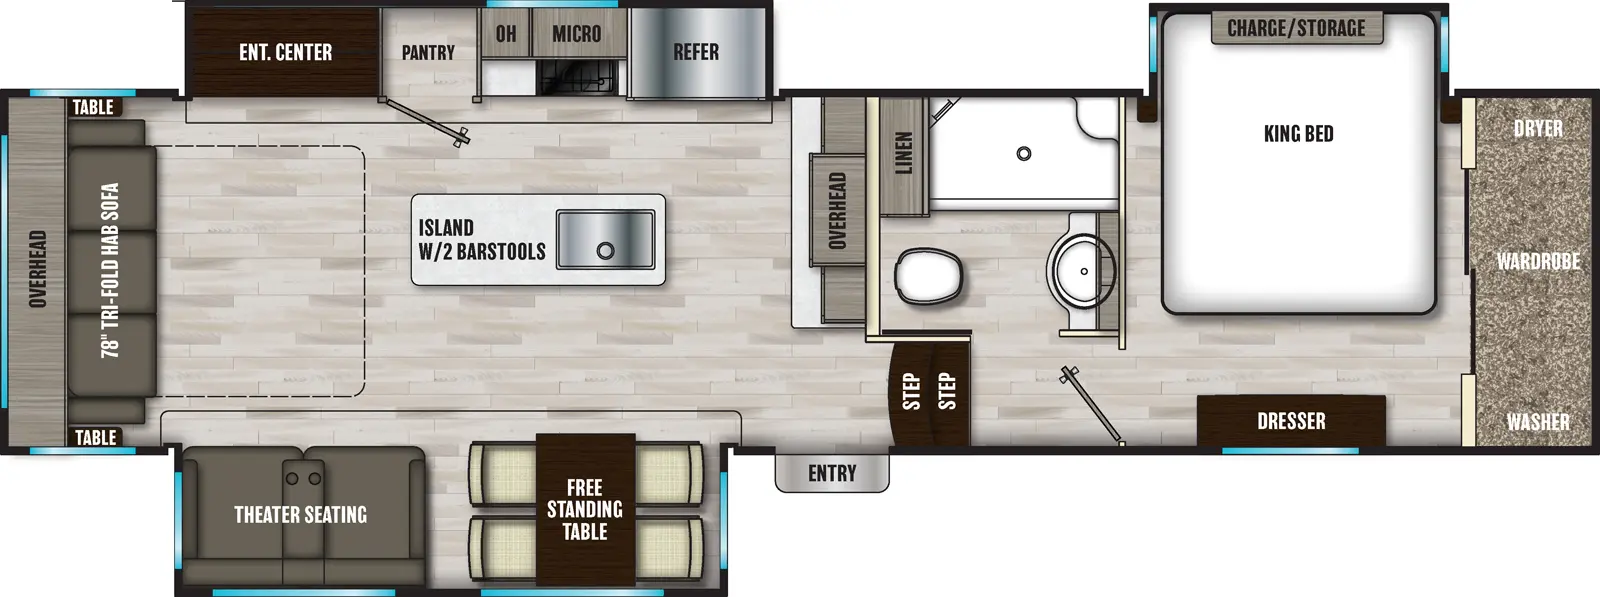 The 336TSIK has three slideouts and one entry. Interior layout front to back: front bedroom with off-door side king bed slideout, front wardrobe with washer and dryer, and door side dresser; off-door side full bathroom with linen closet; two steps down to entry and main living area; counter and overhead cabinet along inner wall; kitchen island with two barstools and sink; off-door side slideout with refrigerator, microwave, countertop, pantry, and entertainment center; door side slideout with free-standing table and theater seating; rear tri-fold hide-a-bed sofa with overhead cabinet and tables on each side.